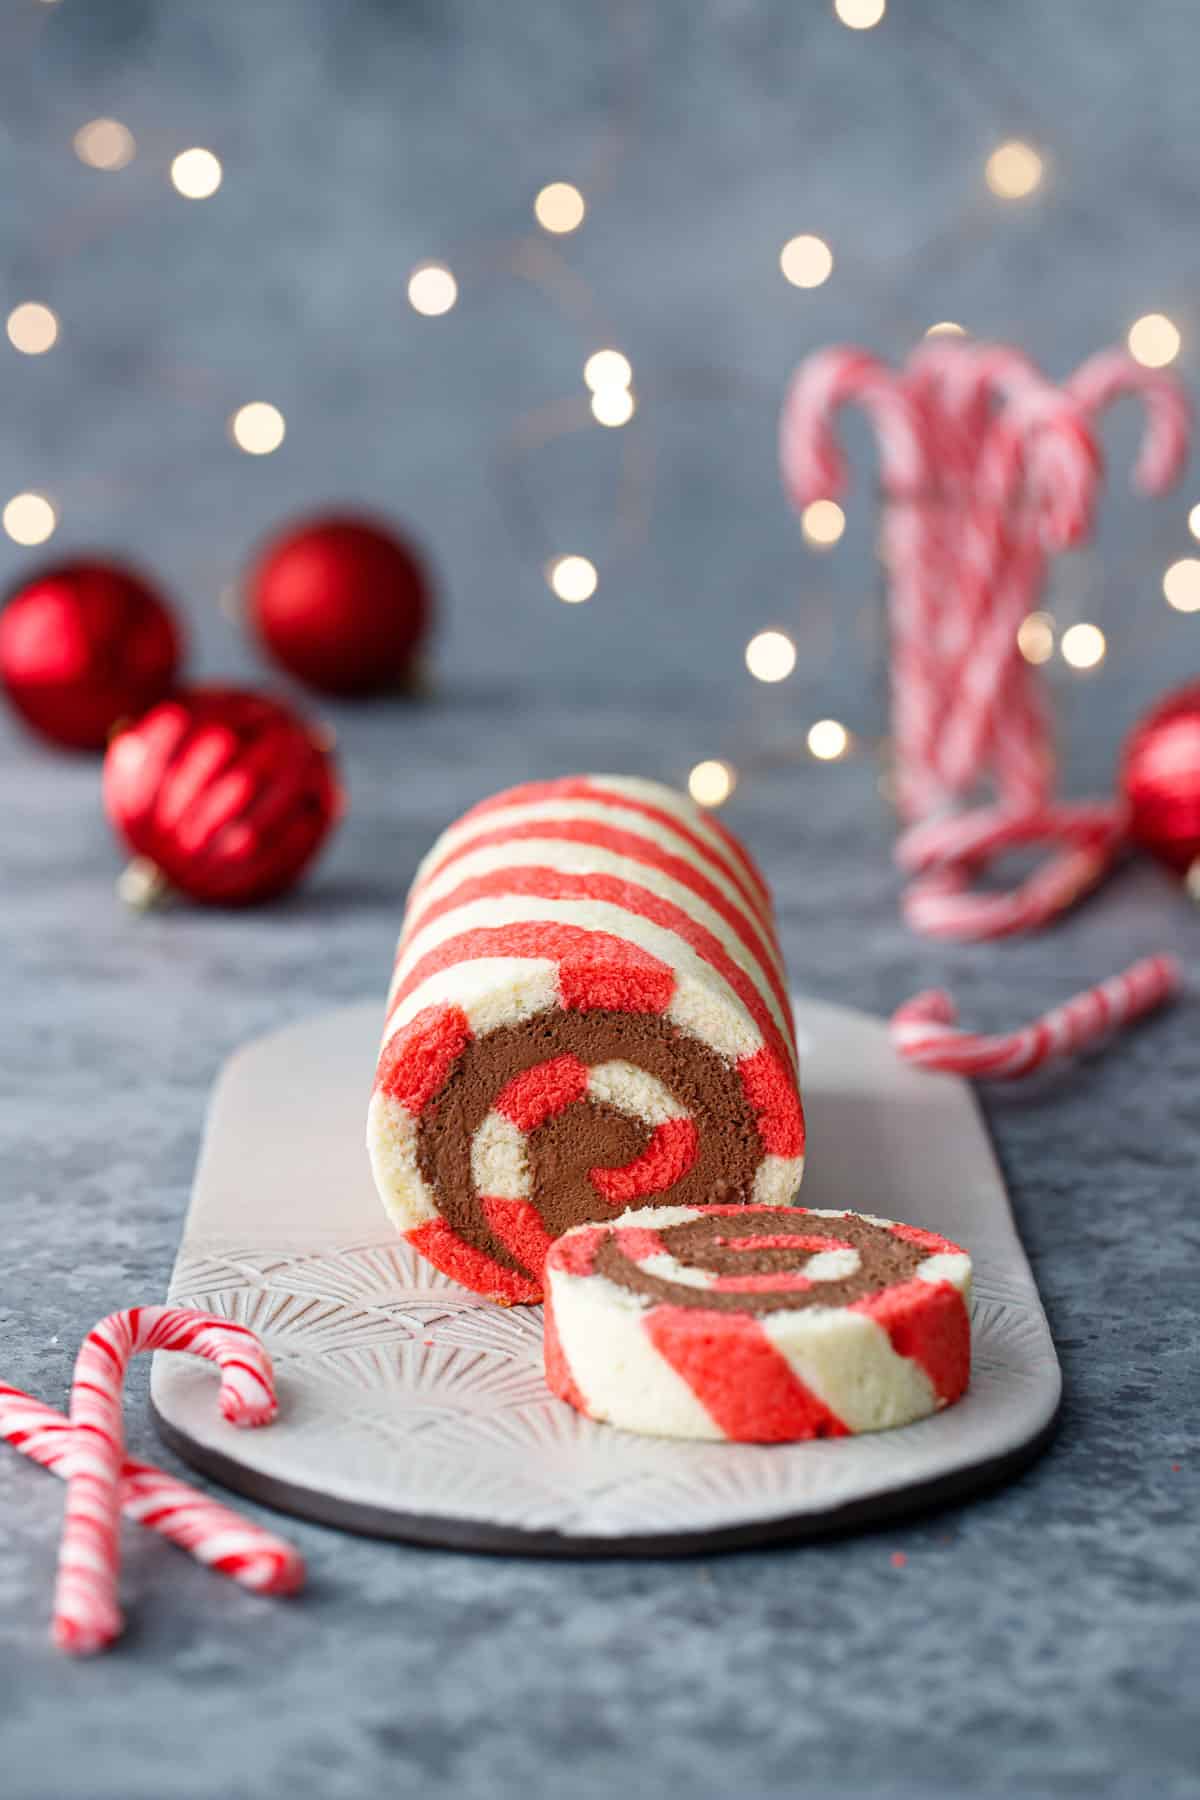 Red and white striped cake roll with one slice cut off to show a perfect spiral of chocolate peppermint whipped cream filling, with candy canes, red ornaments, and Christmas lights out of focus in the background.